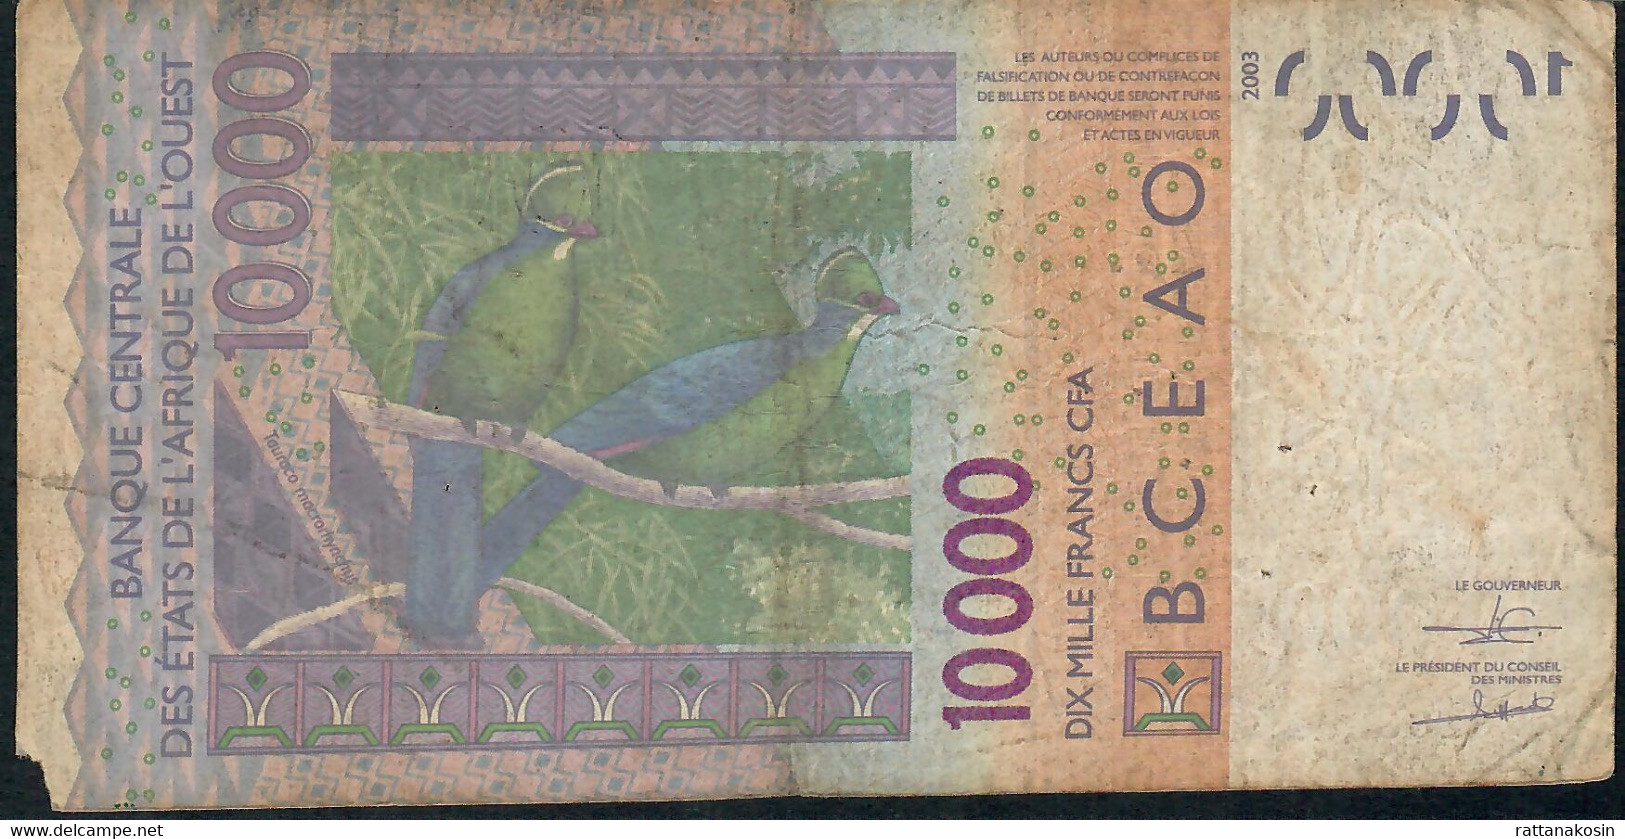 W.A.S. P718Kq 10000 Or 10.000 FRANCS (20)17 VG - West African States